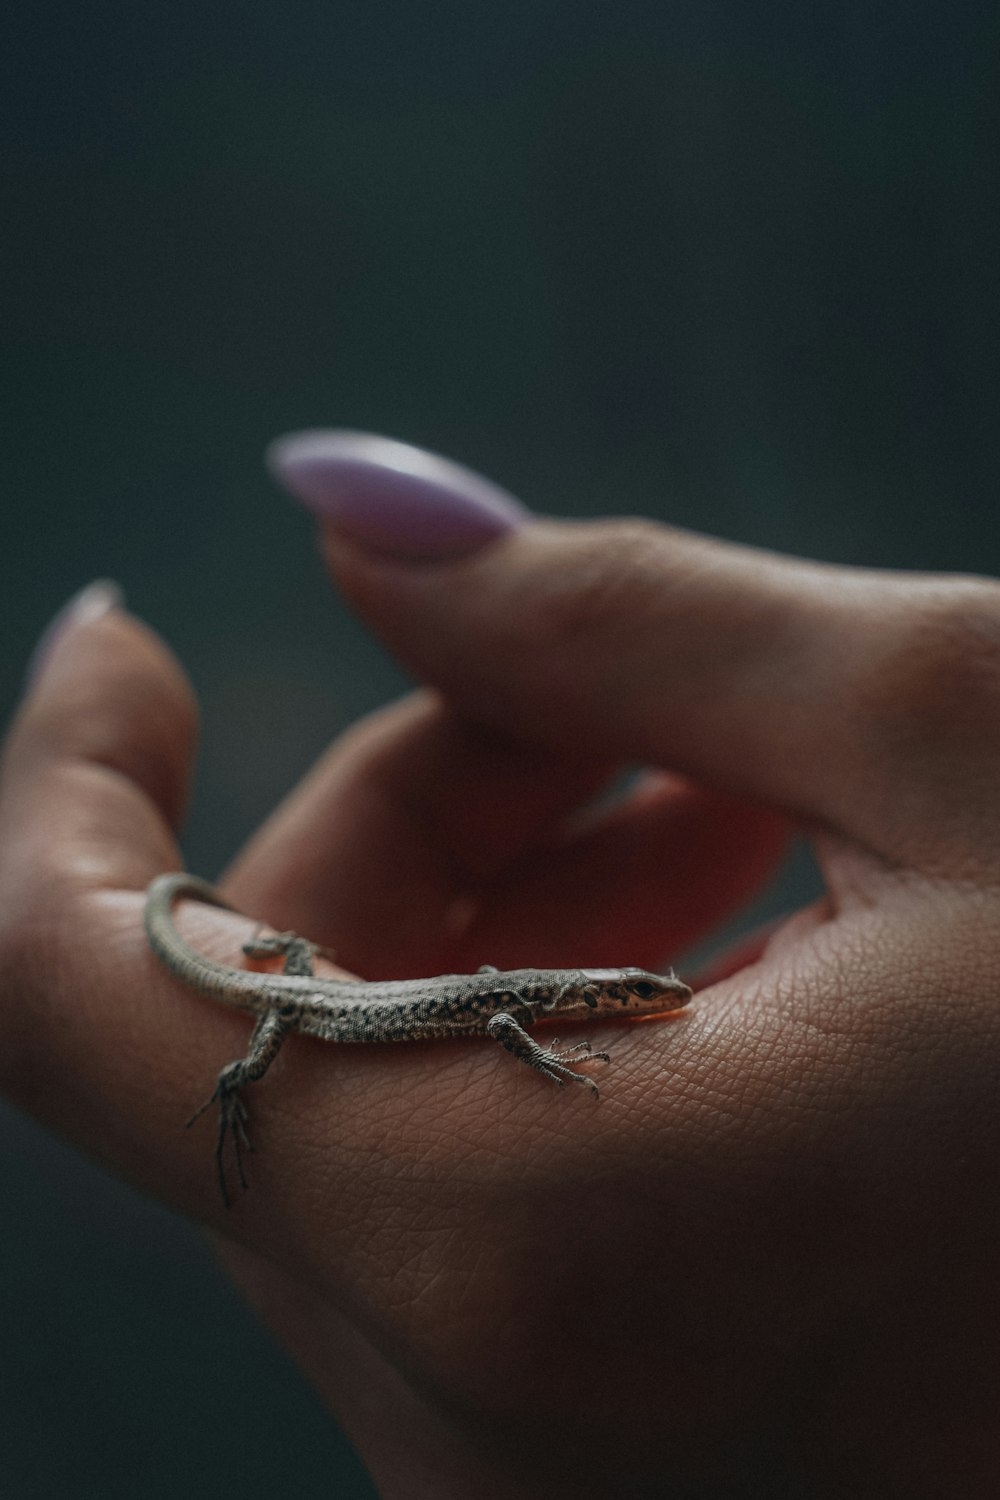 a small lizard sitting on top of a woman's hand